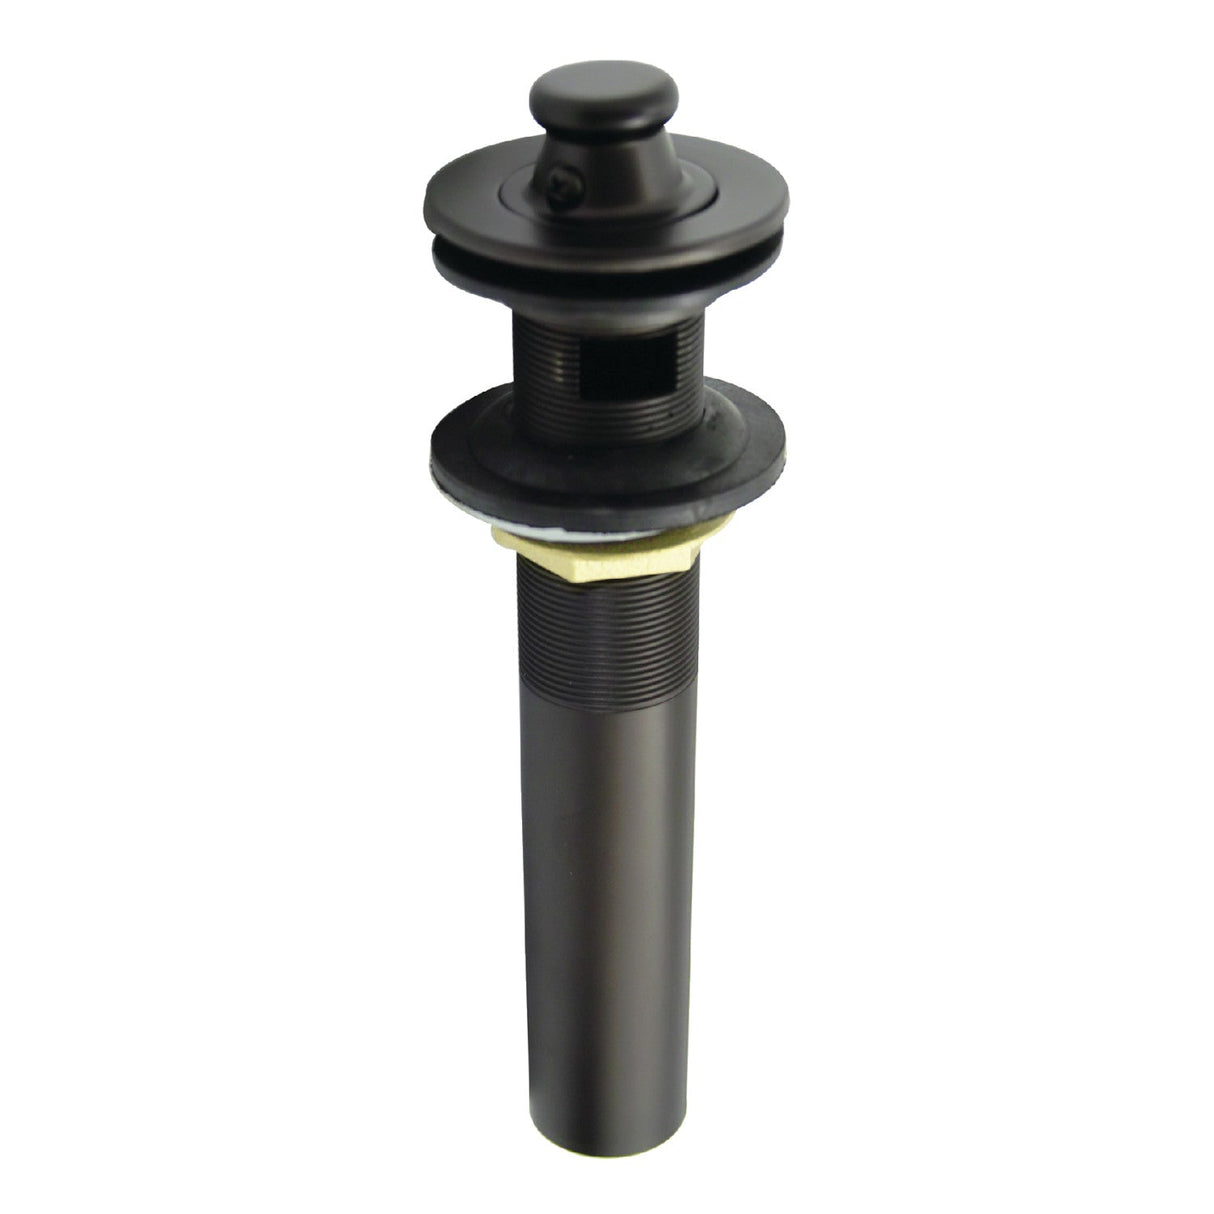 Fauceture KB3005 Brass Lift and Turn Bathroom Sink Drain with Overflow, 17 Gauge, Oil Rubbed Bronze